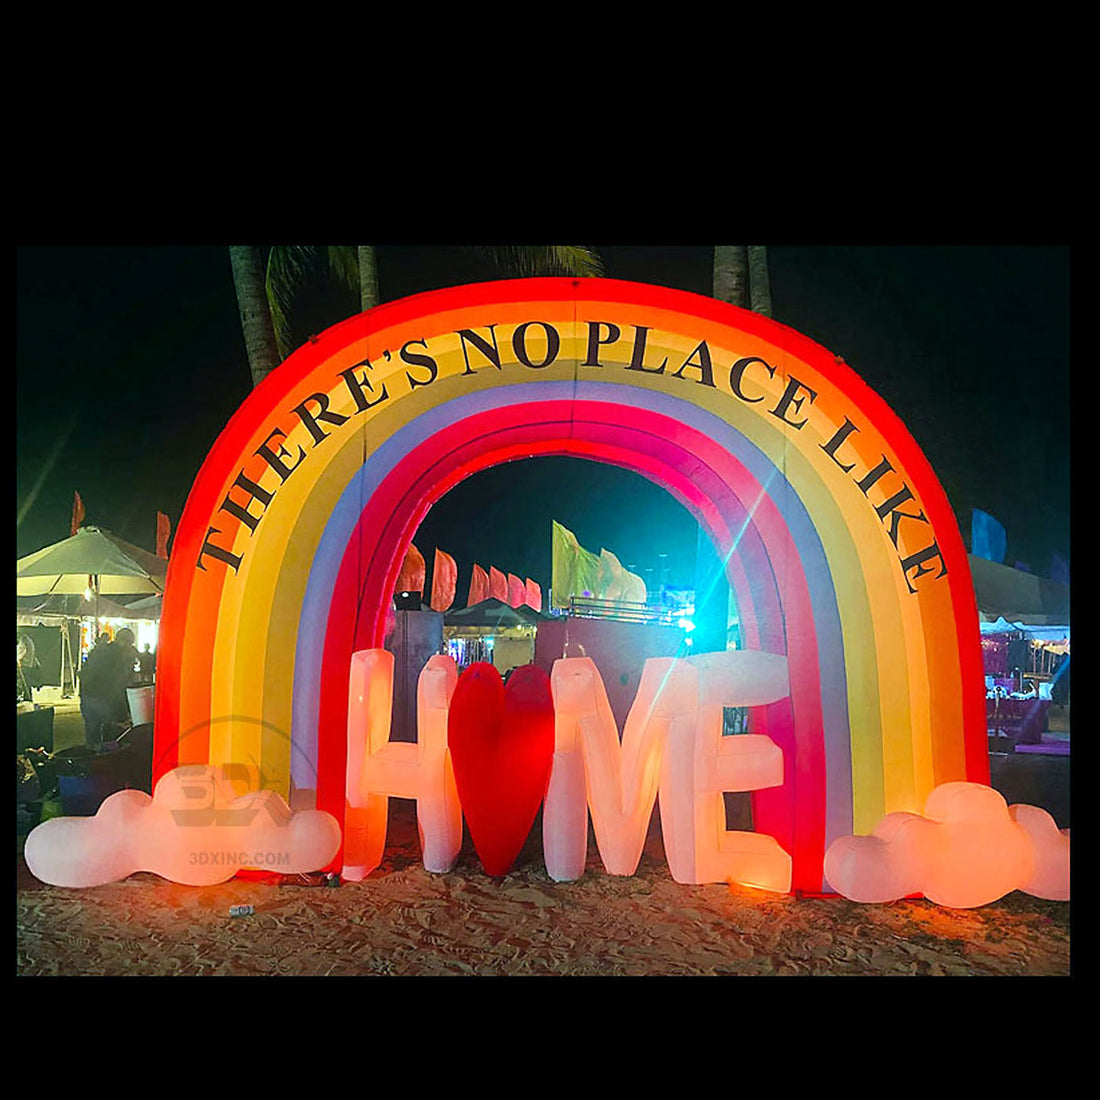 THERE'S NO PLACE LIKE HOME - 01